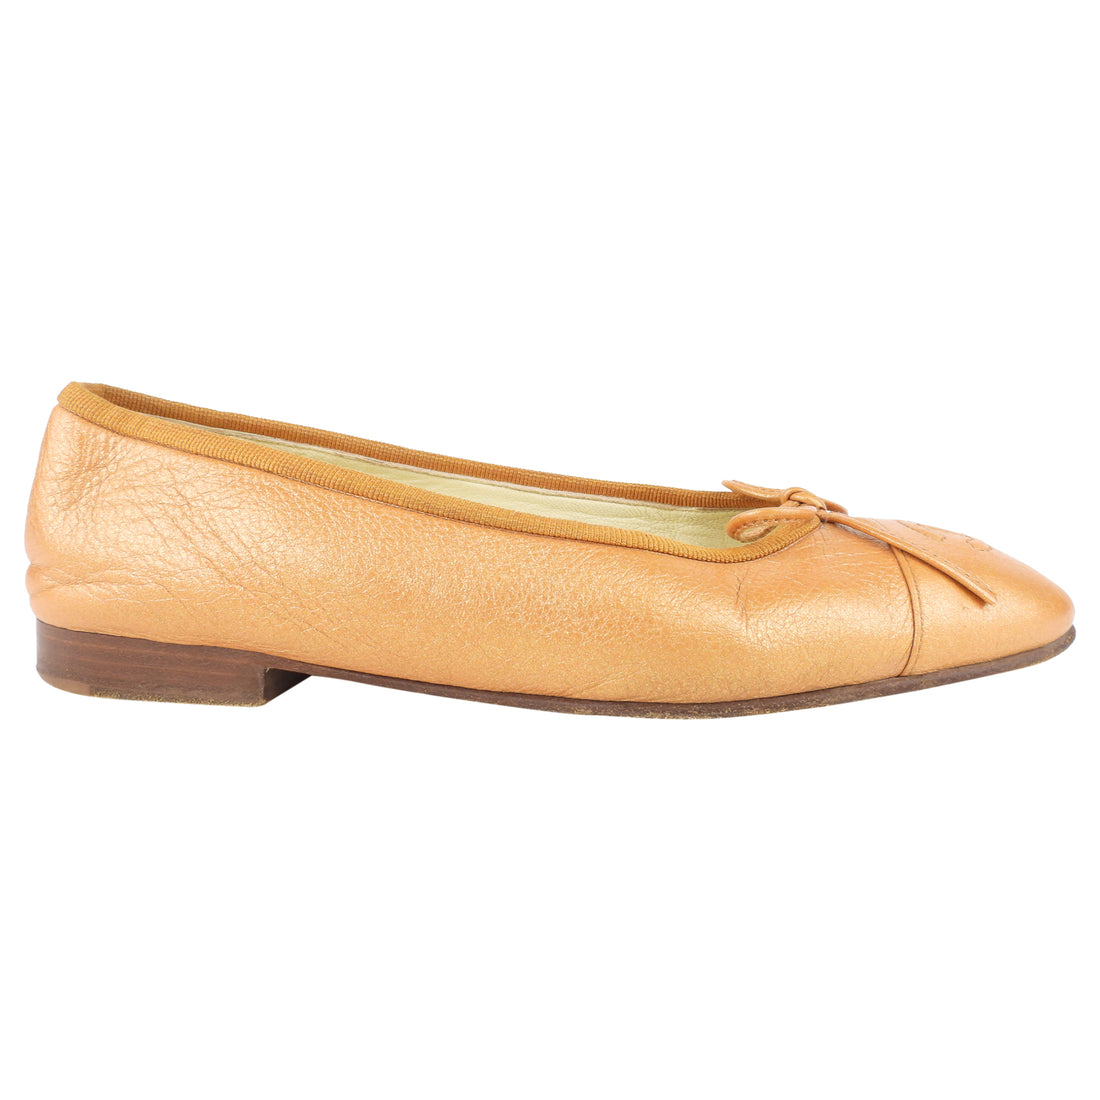 Chanel - Authenticated Ballet Flats - Leather Gold Plain for Women, Very Good Condition